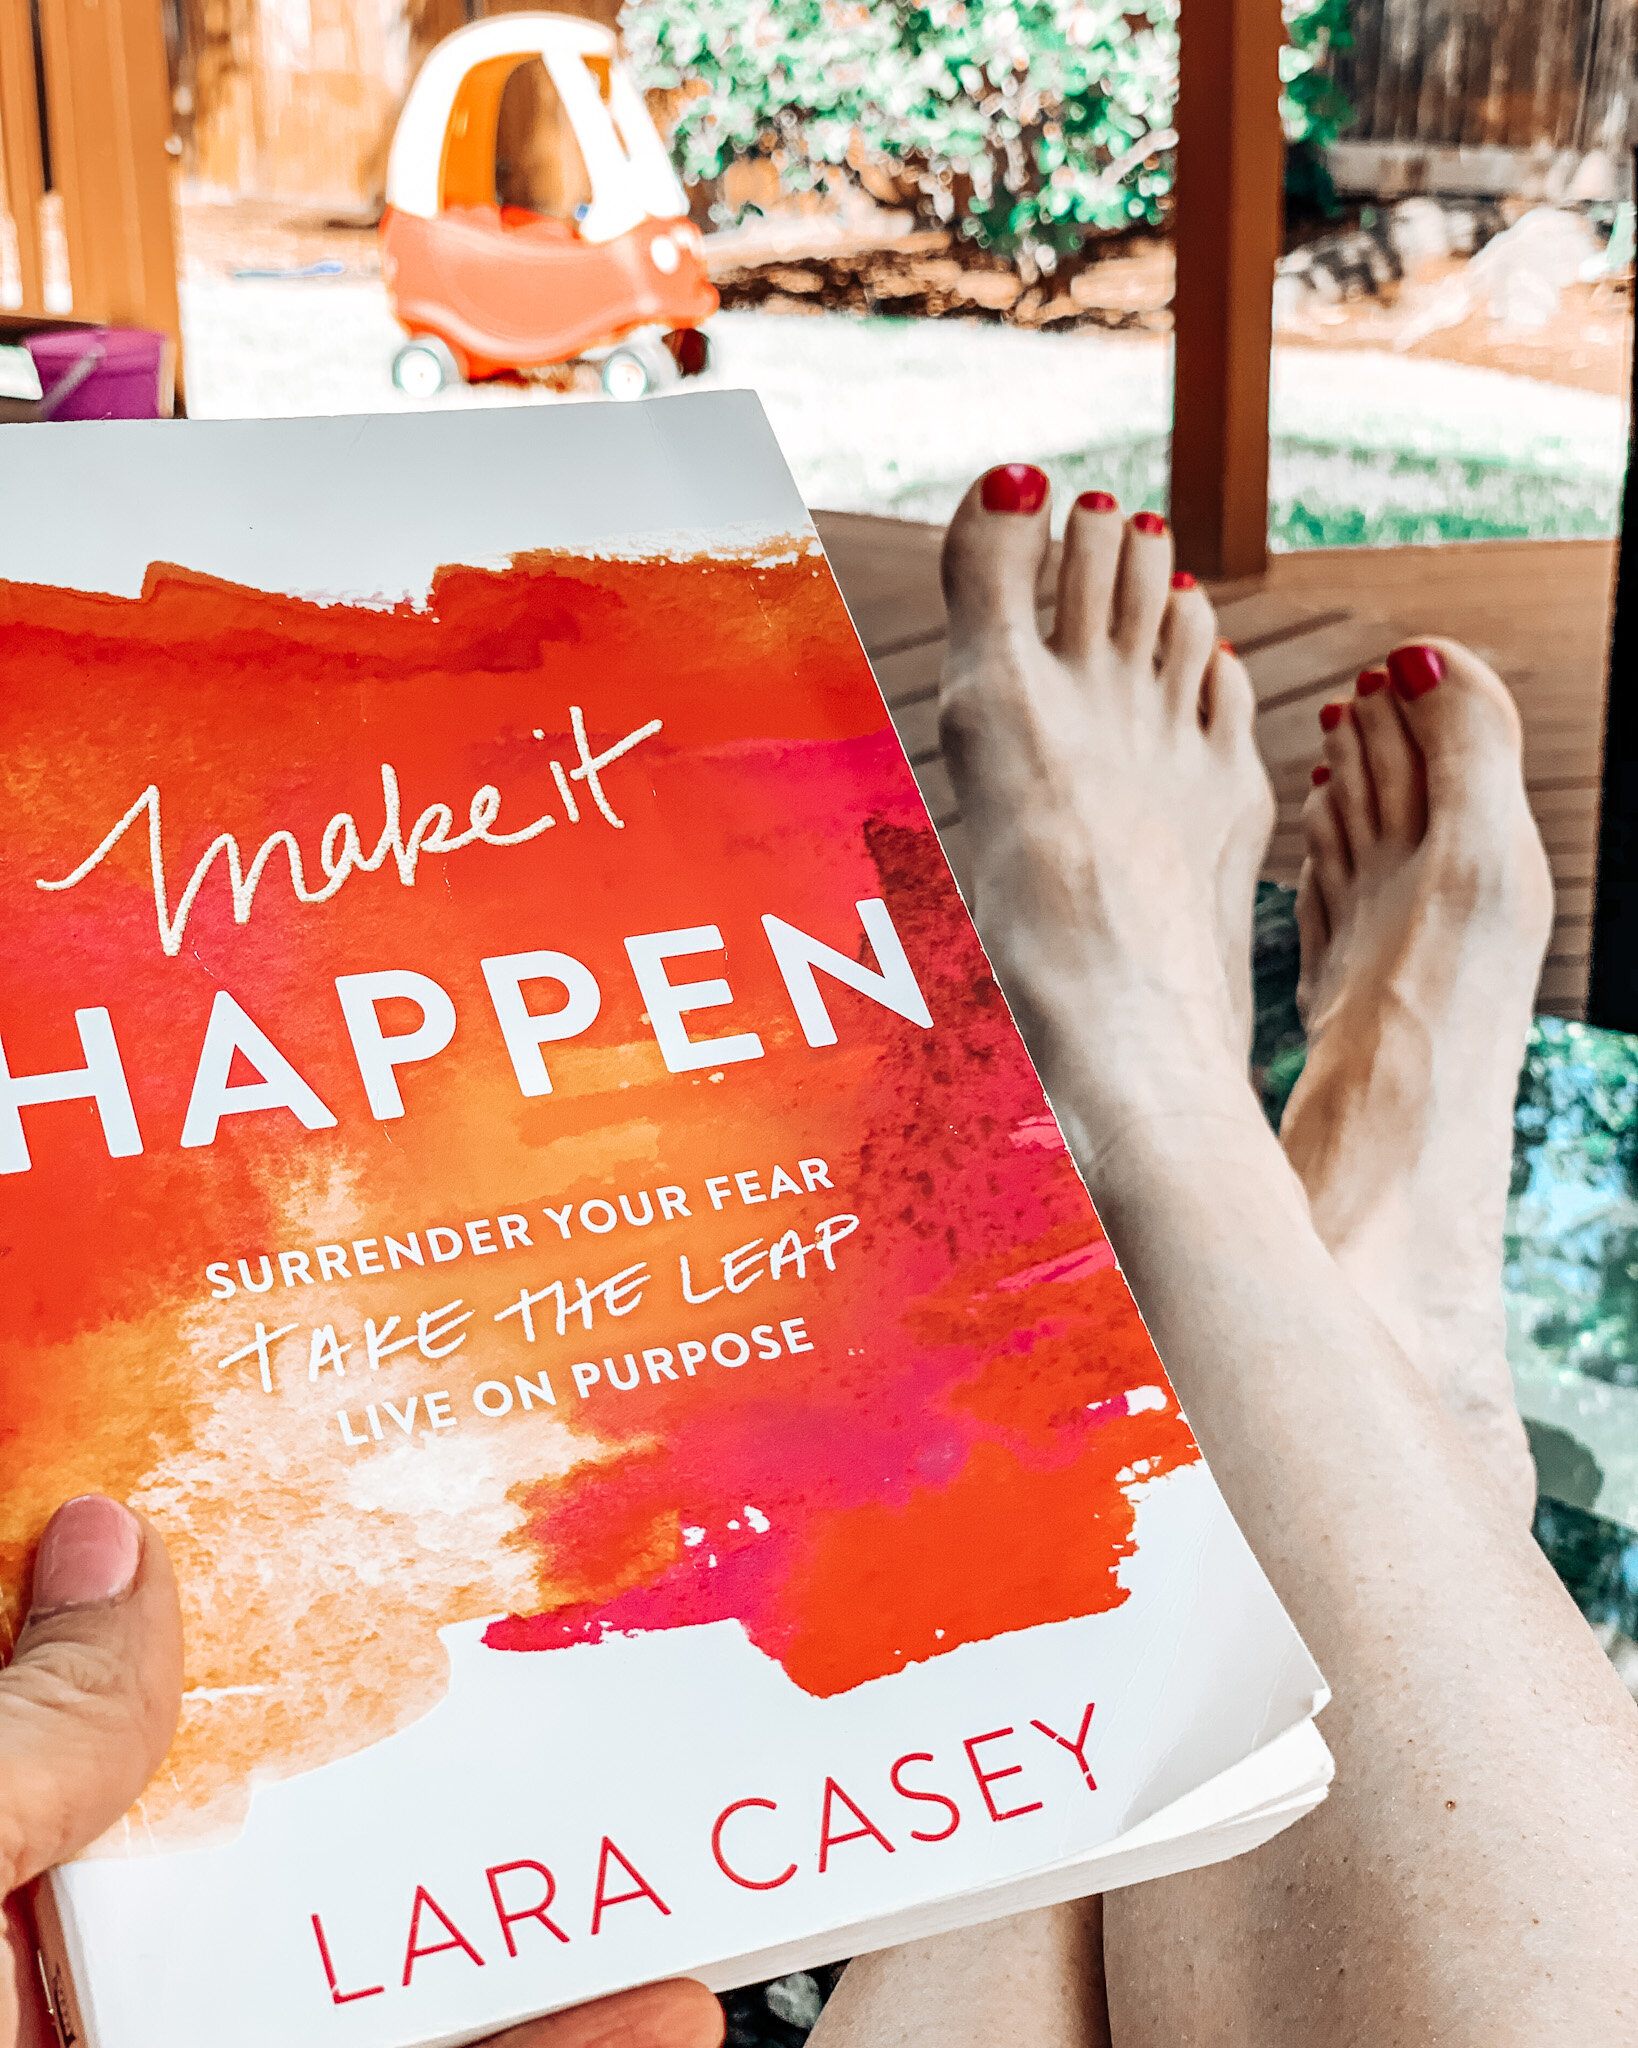 It’s hard to find time to read with three young kids to wrangle. But when I find a good book, I somehow manage to carve out the time. I read Make It Happen by Lara Casey during deployment when my youngest was a newborn—it was that good! One of my fa…